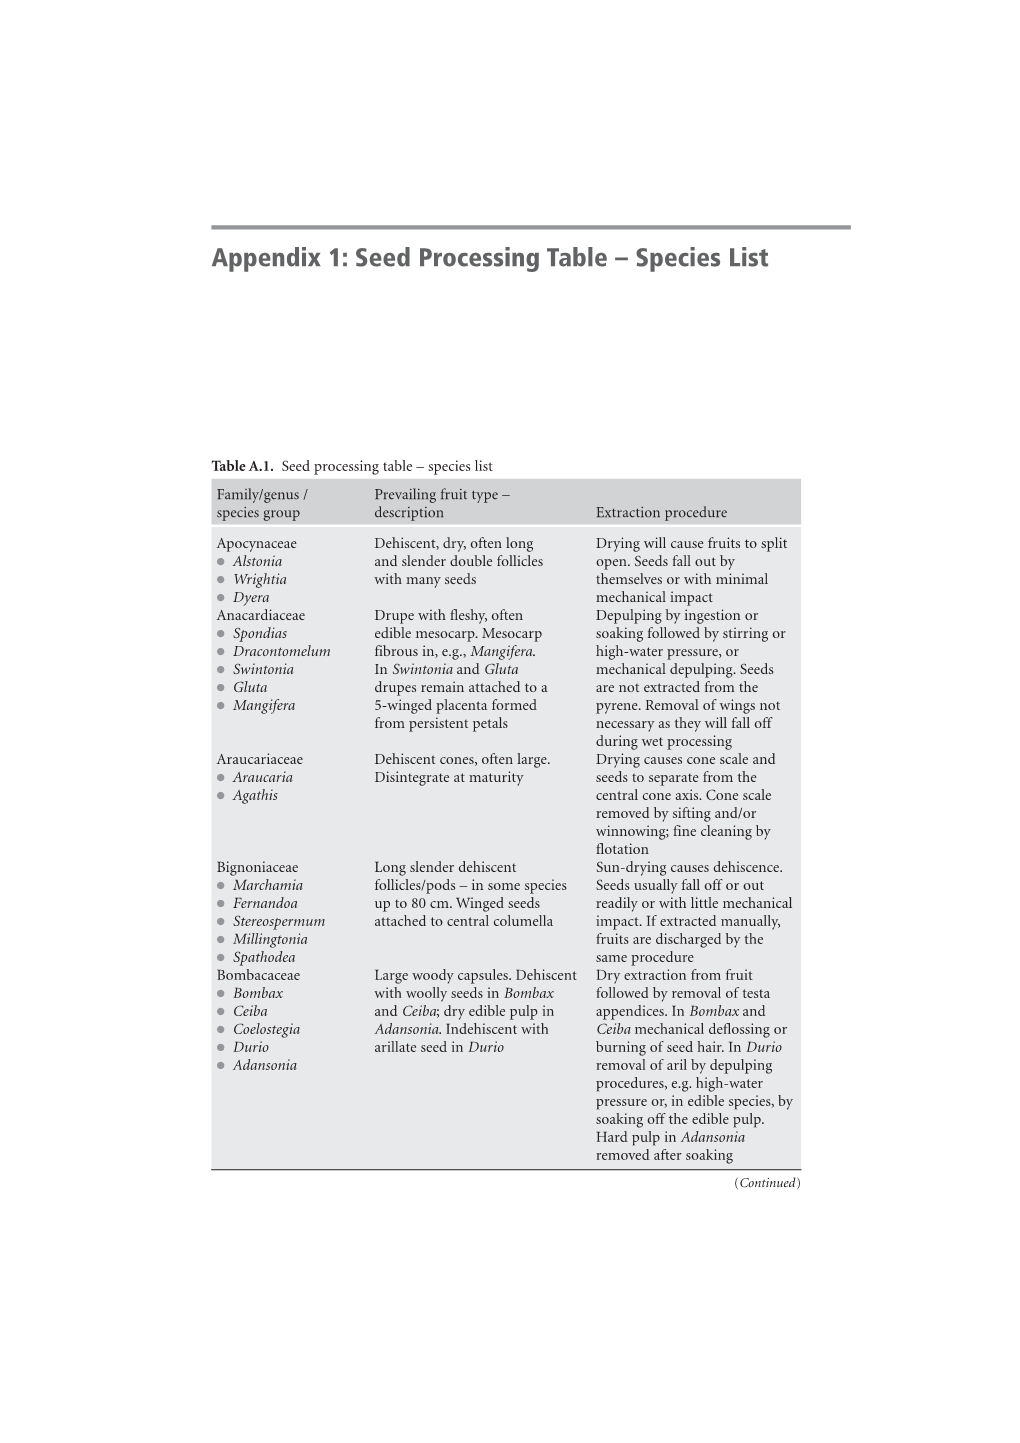 Appendix 1: Seed Processing Table – Species List